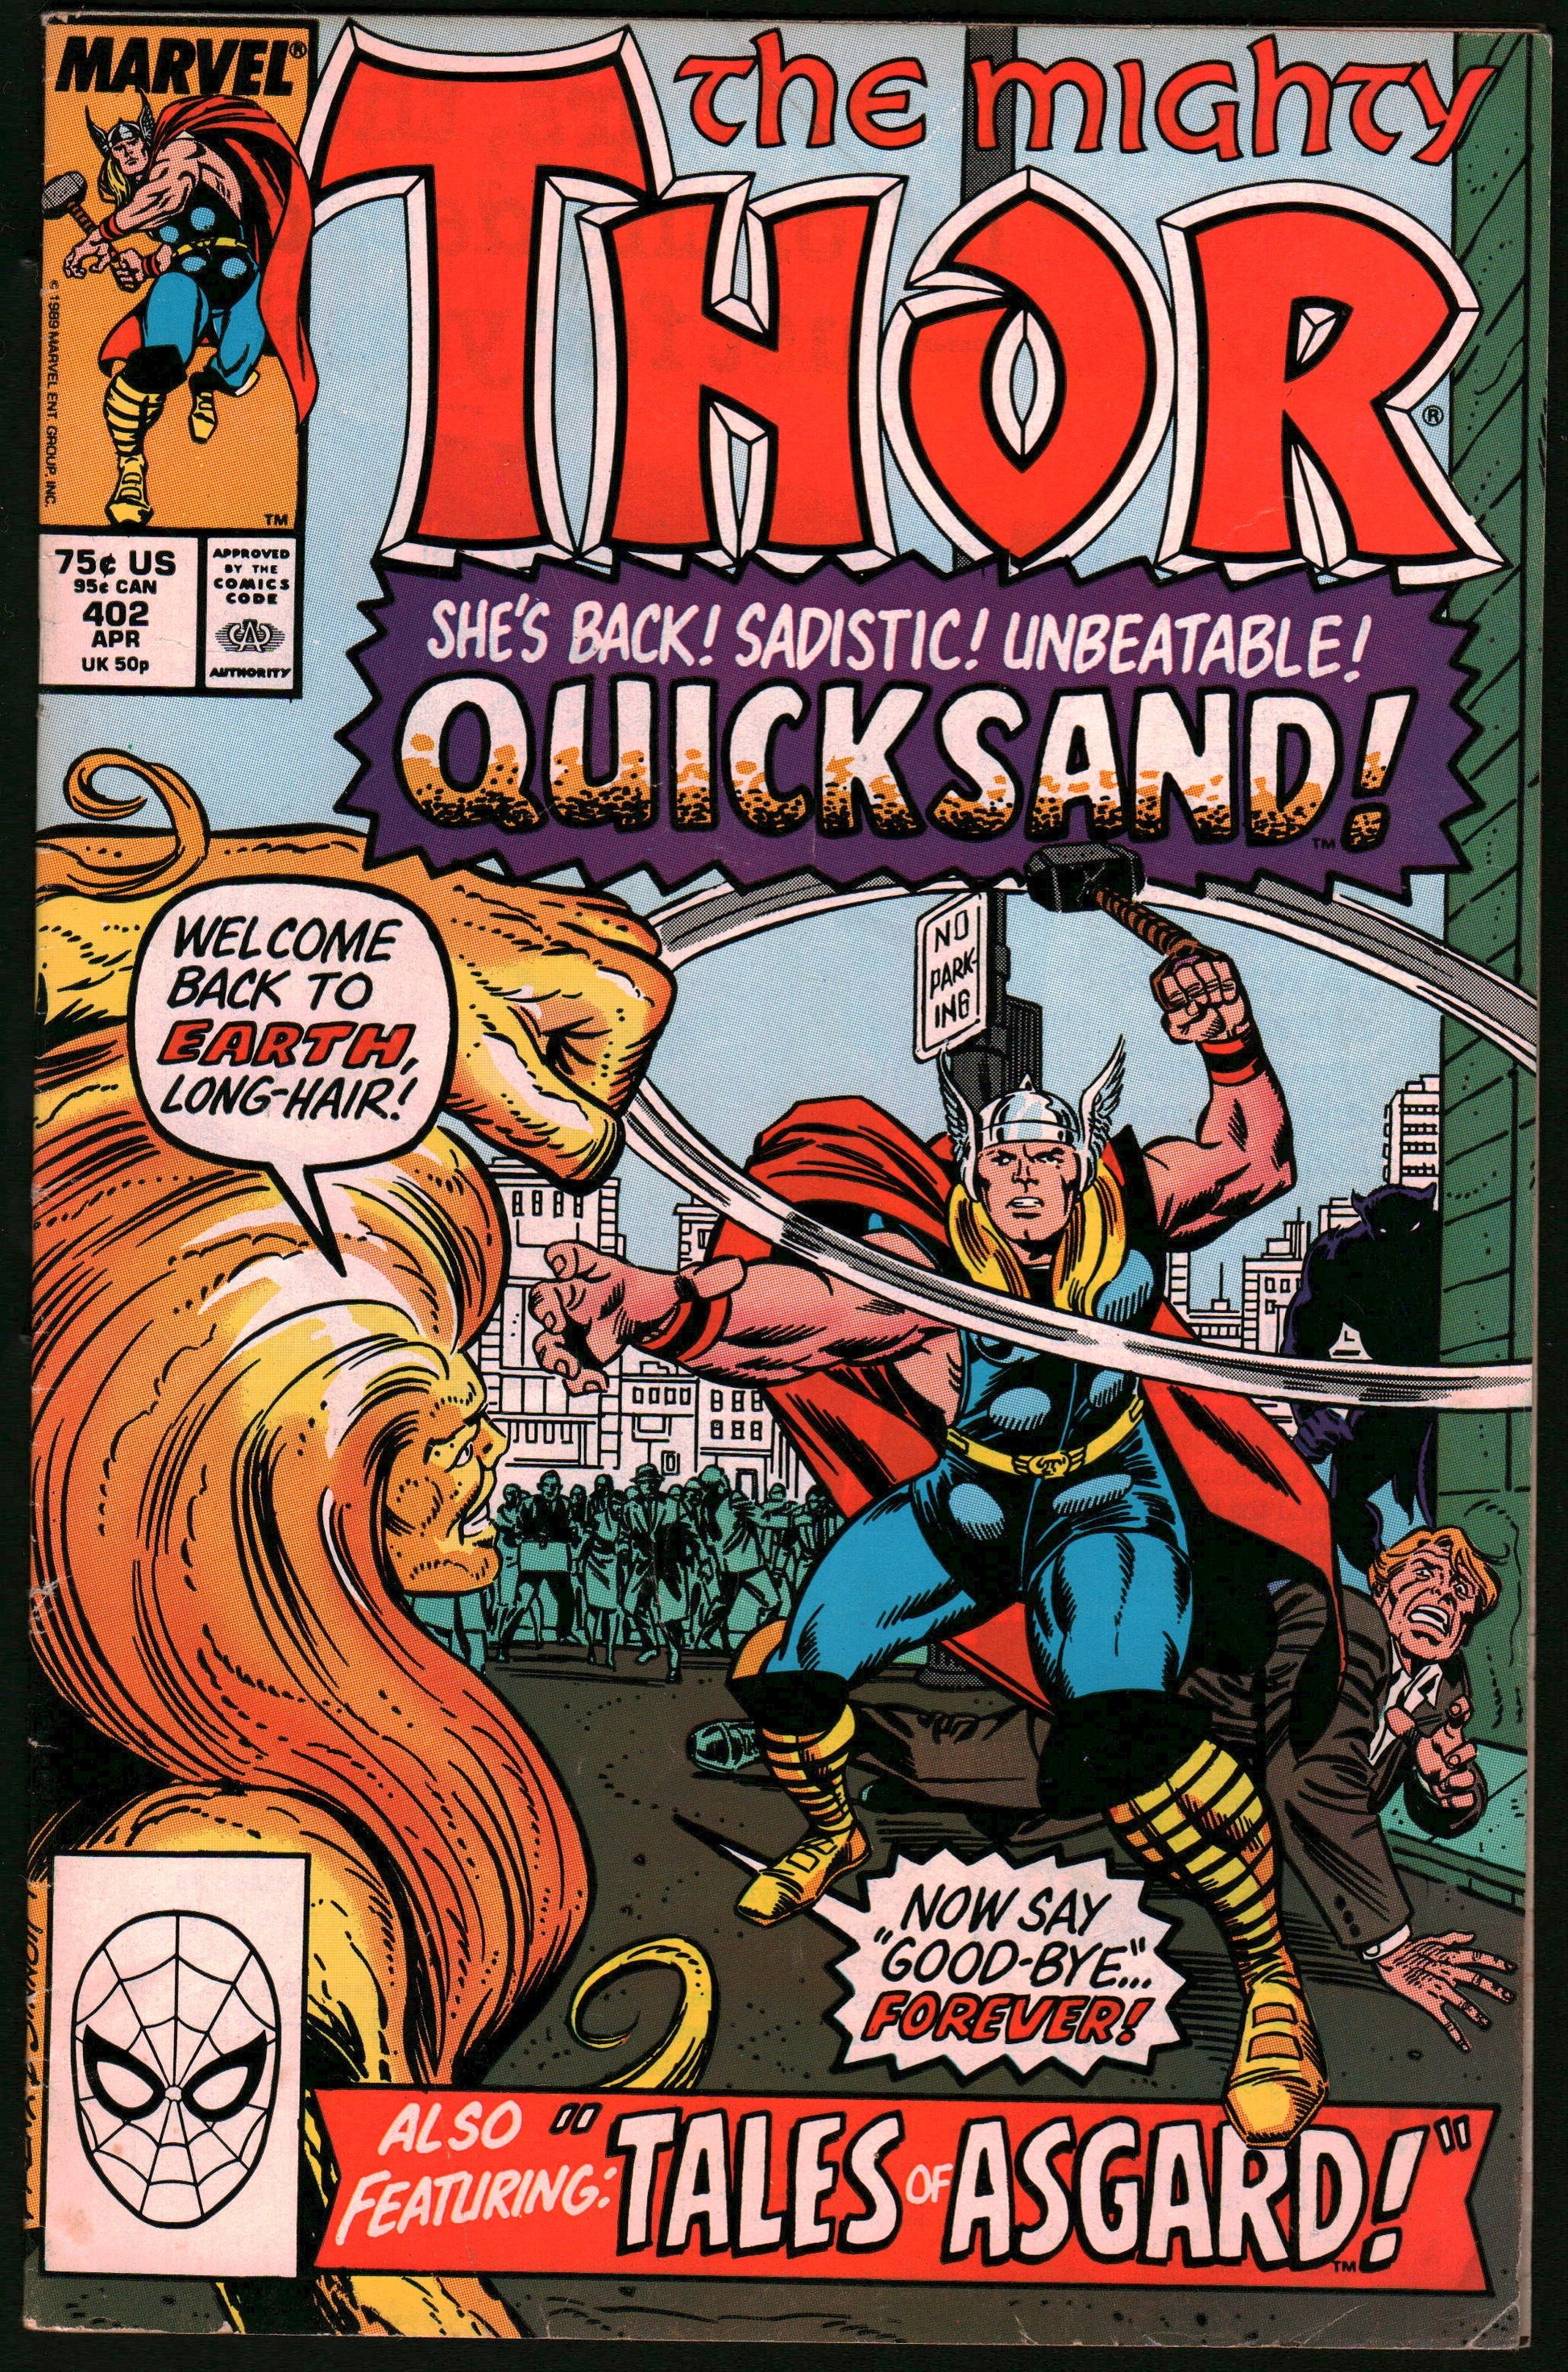 Thor #402 (4/89) - The One Stop Shop Comics & Games